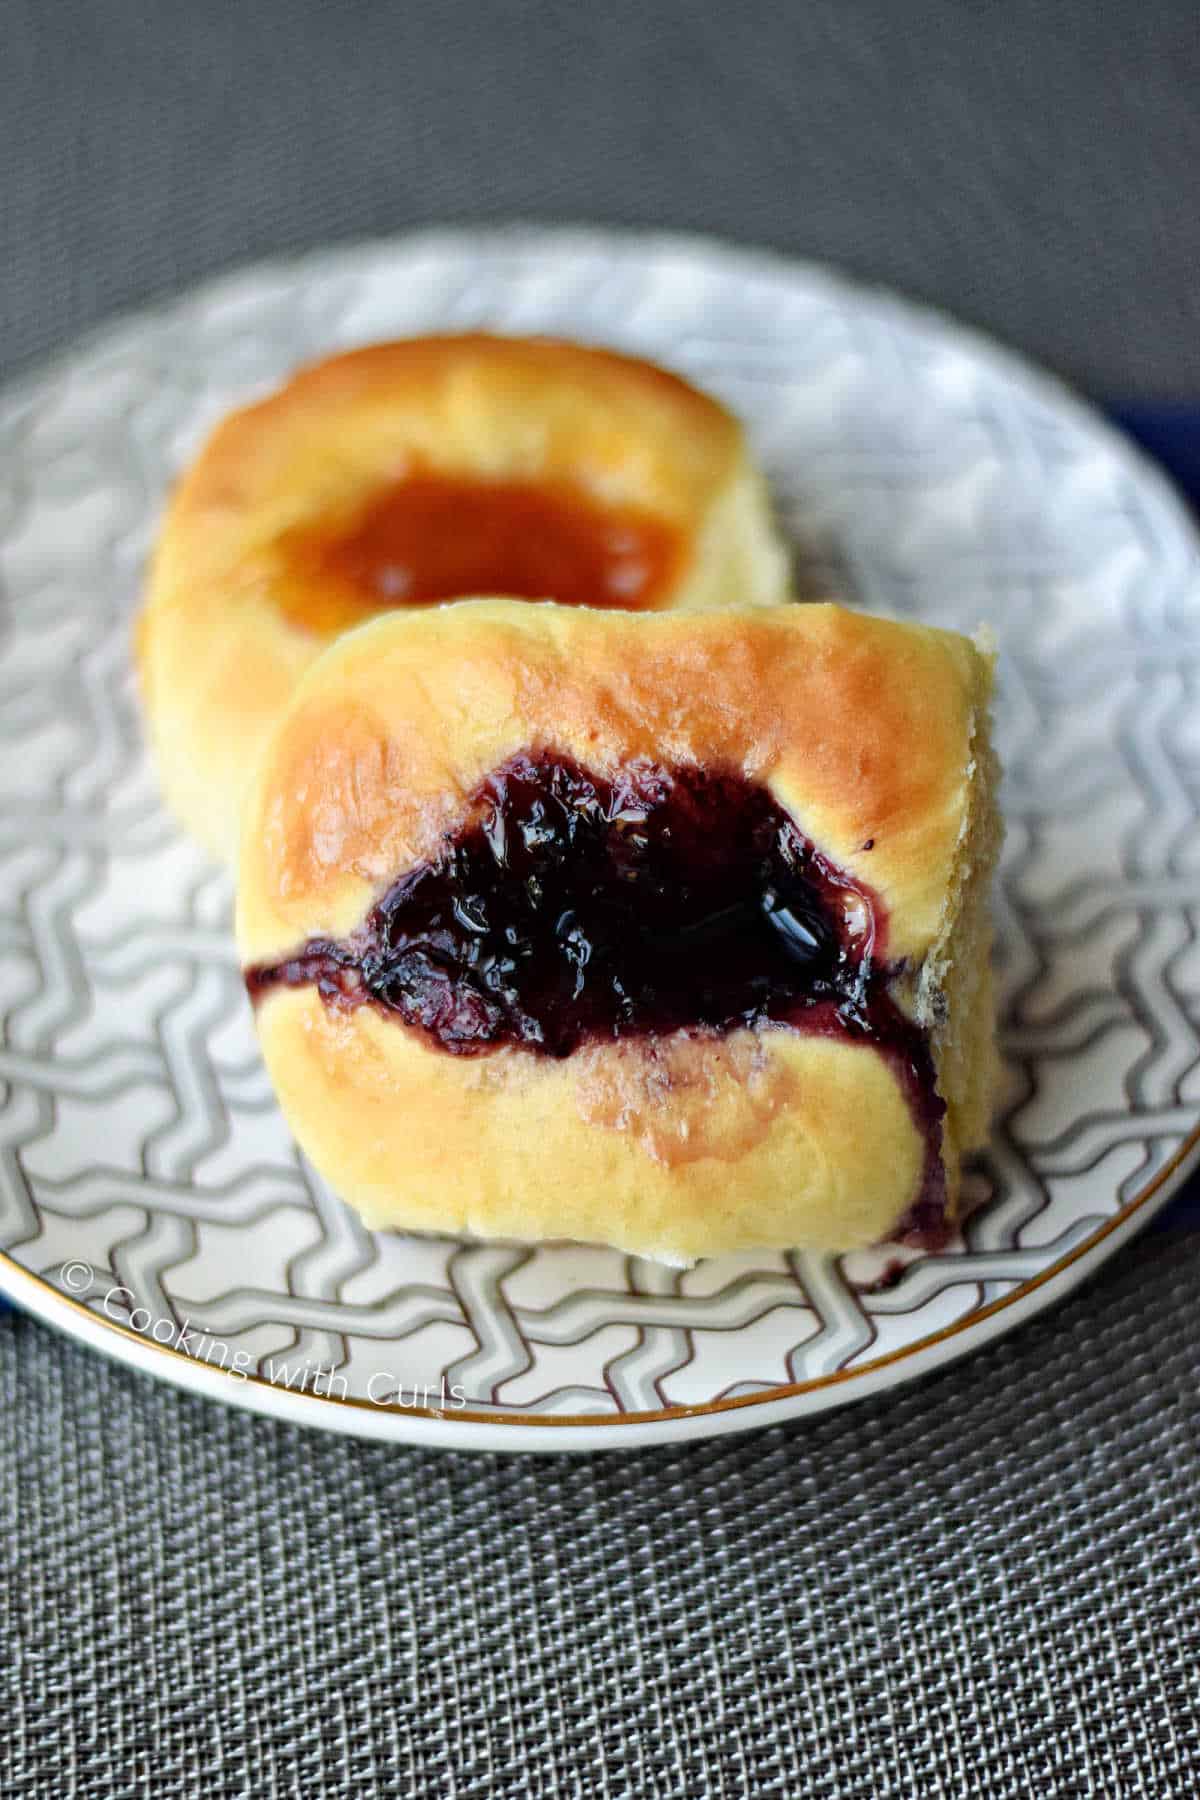 One traditional blueberry kolache and one apricot on a plate.